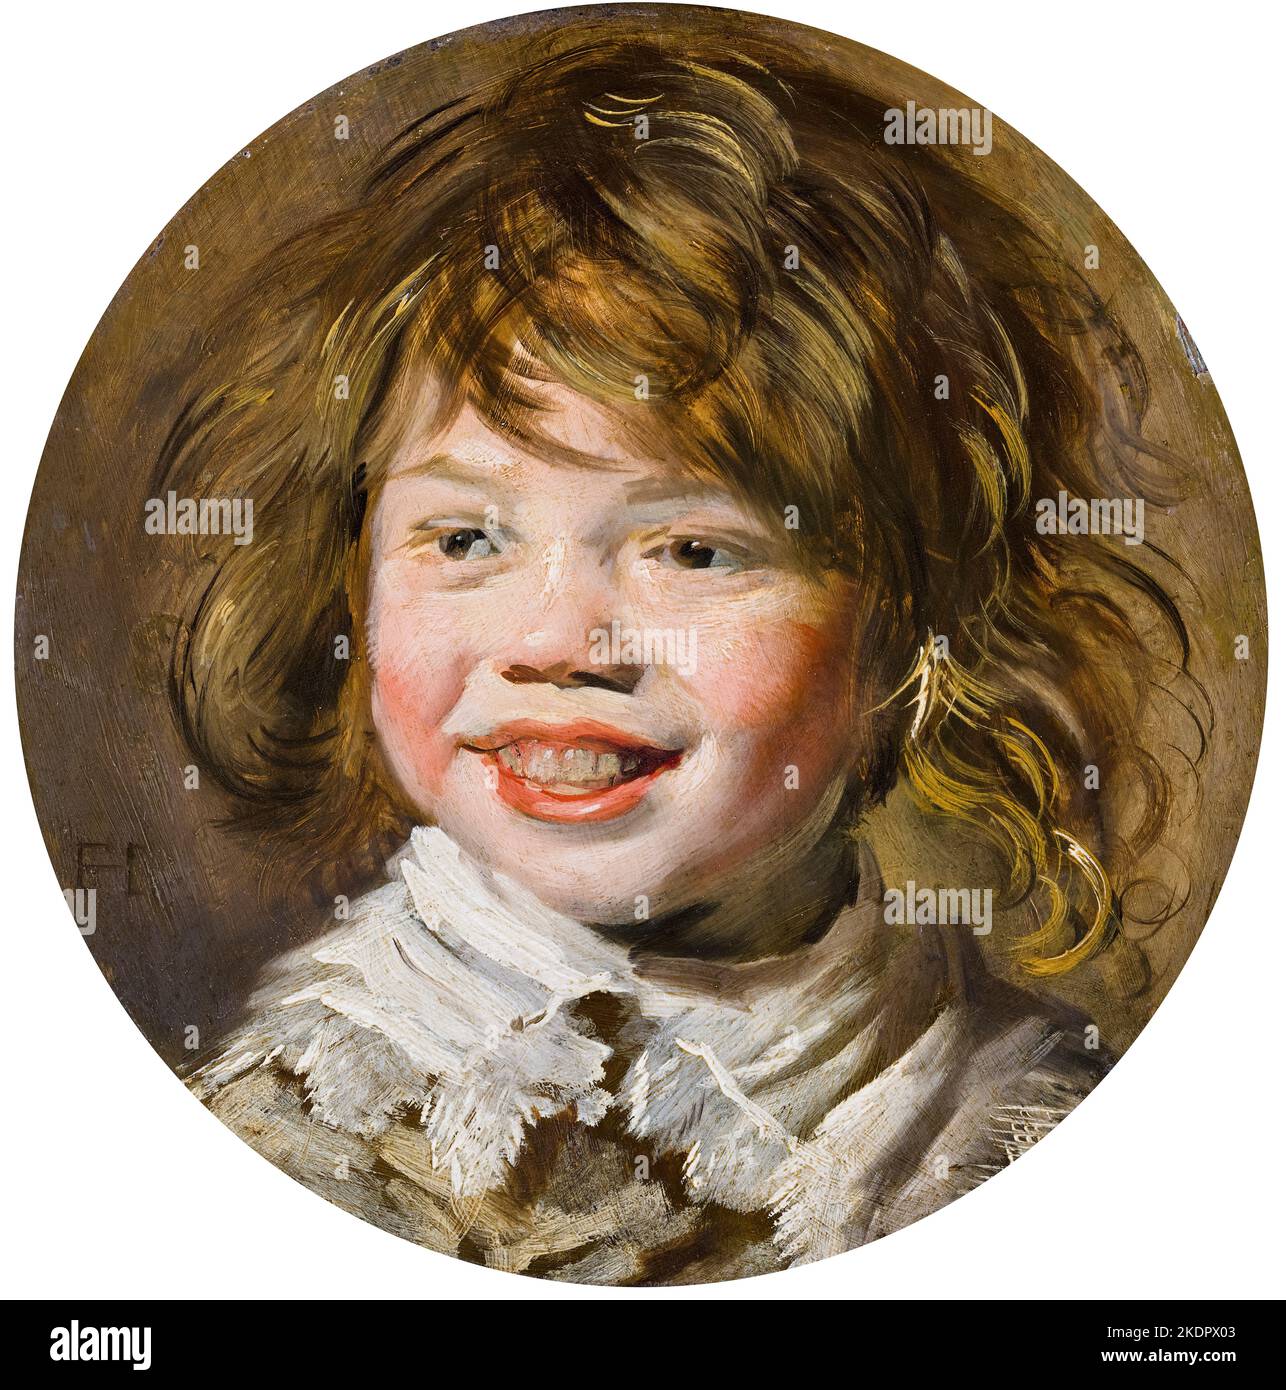 Frans Hals, Laughing Boy, portrait painting in oil on panel, circa 1625 Stock Photo